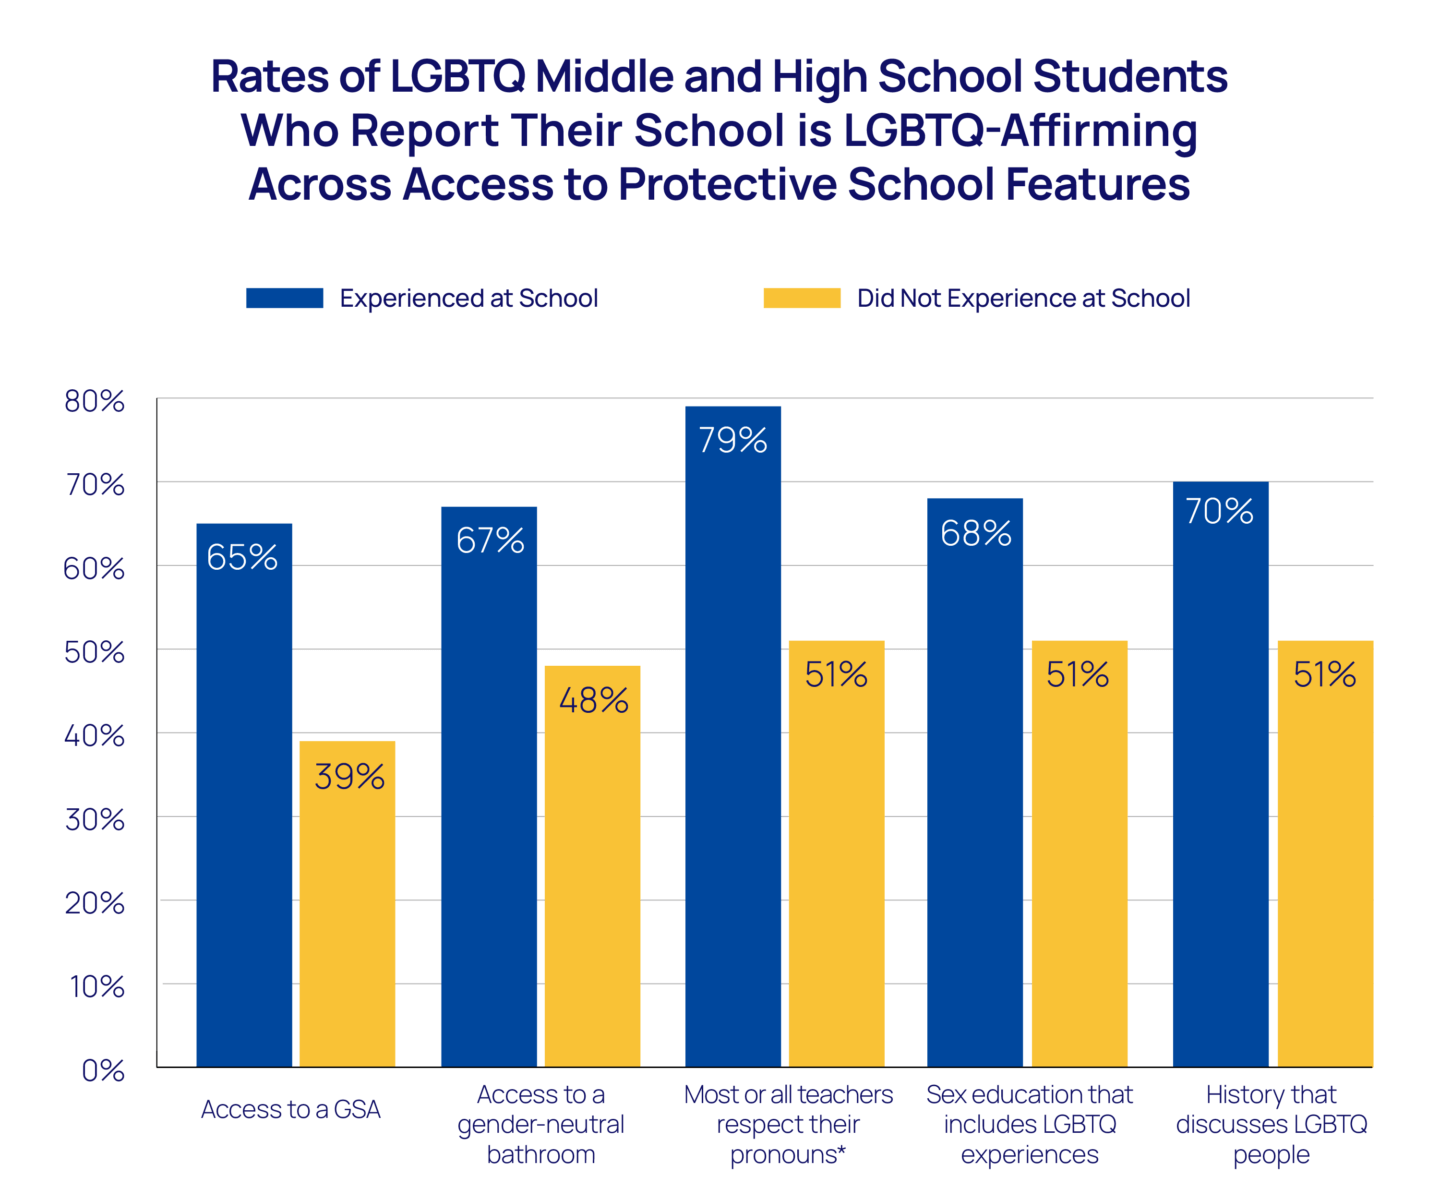 Rates of LGBTQ Middle and High School Students Who Report Their School is LGBTQ-Affirming Across Access to Protective School Features Bar Chart